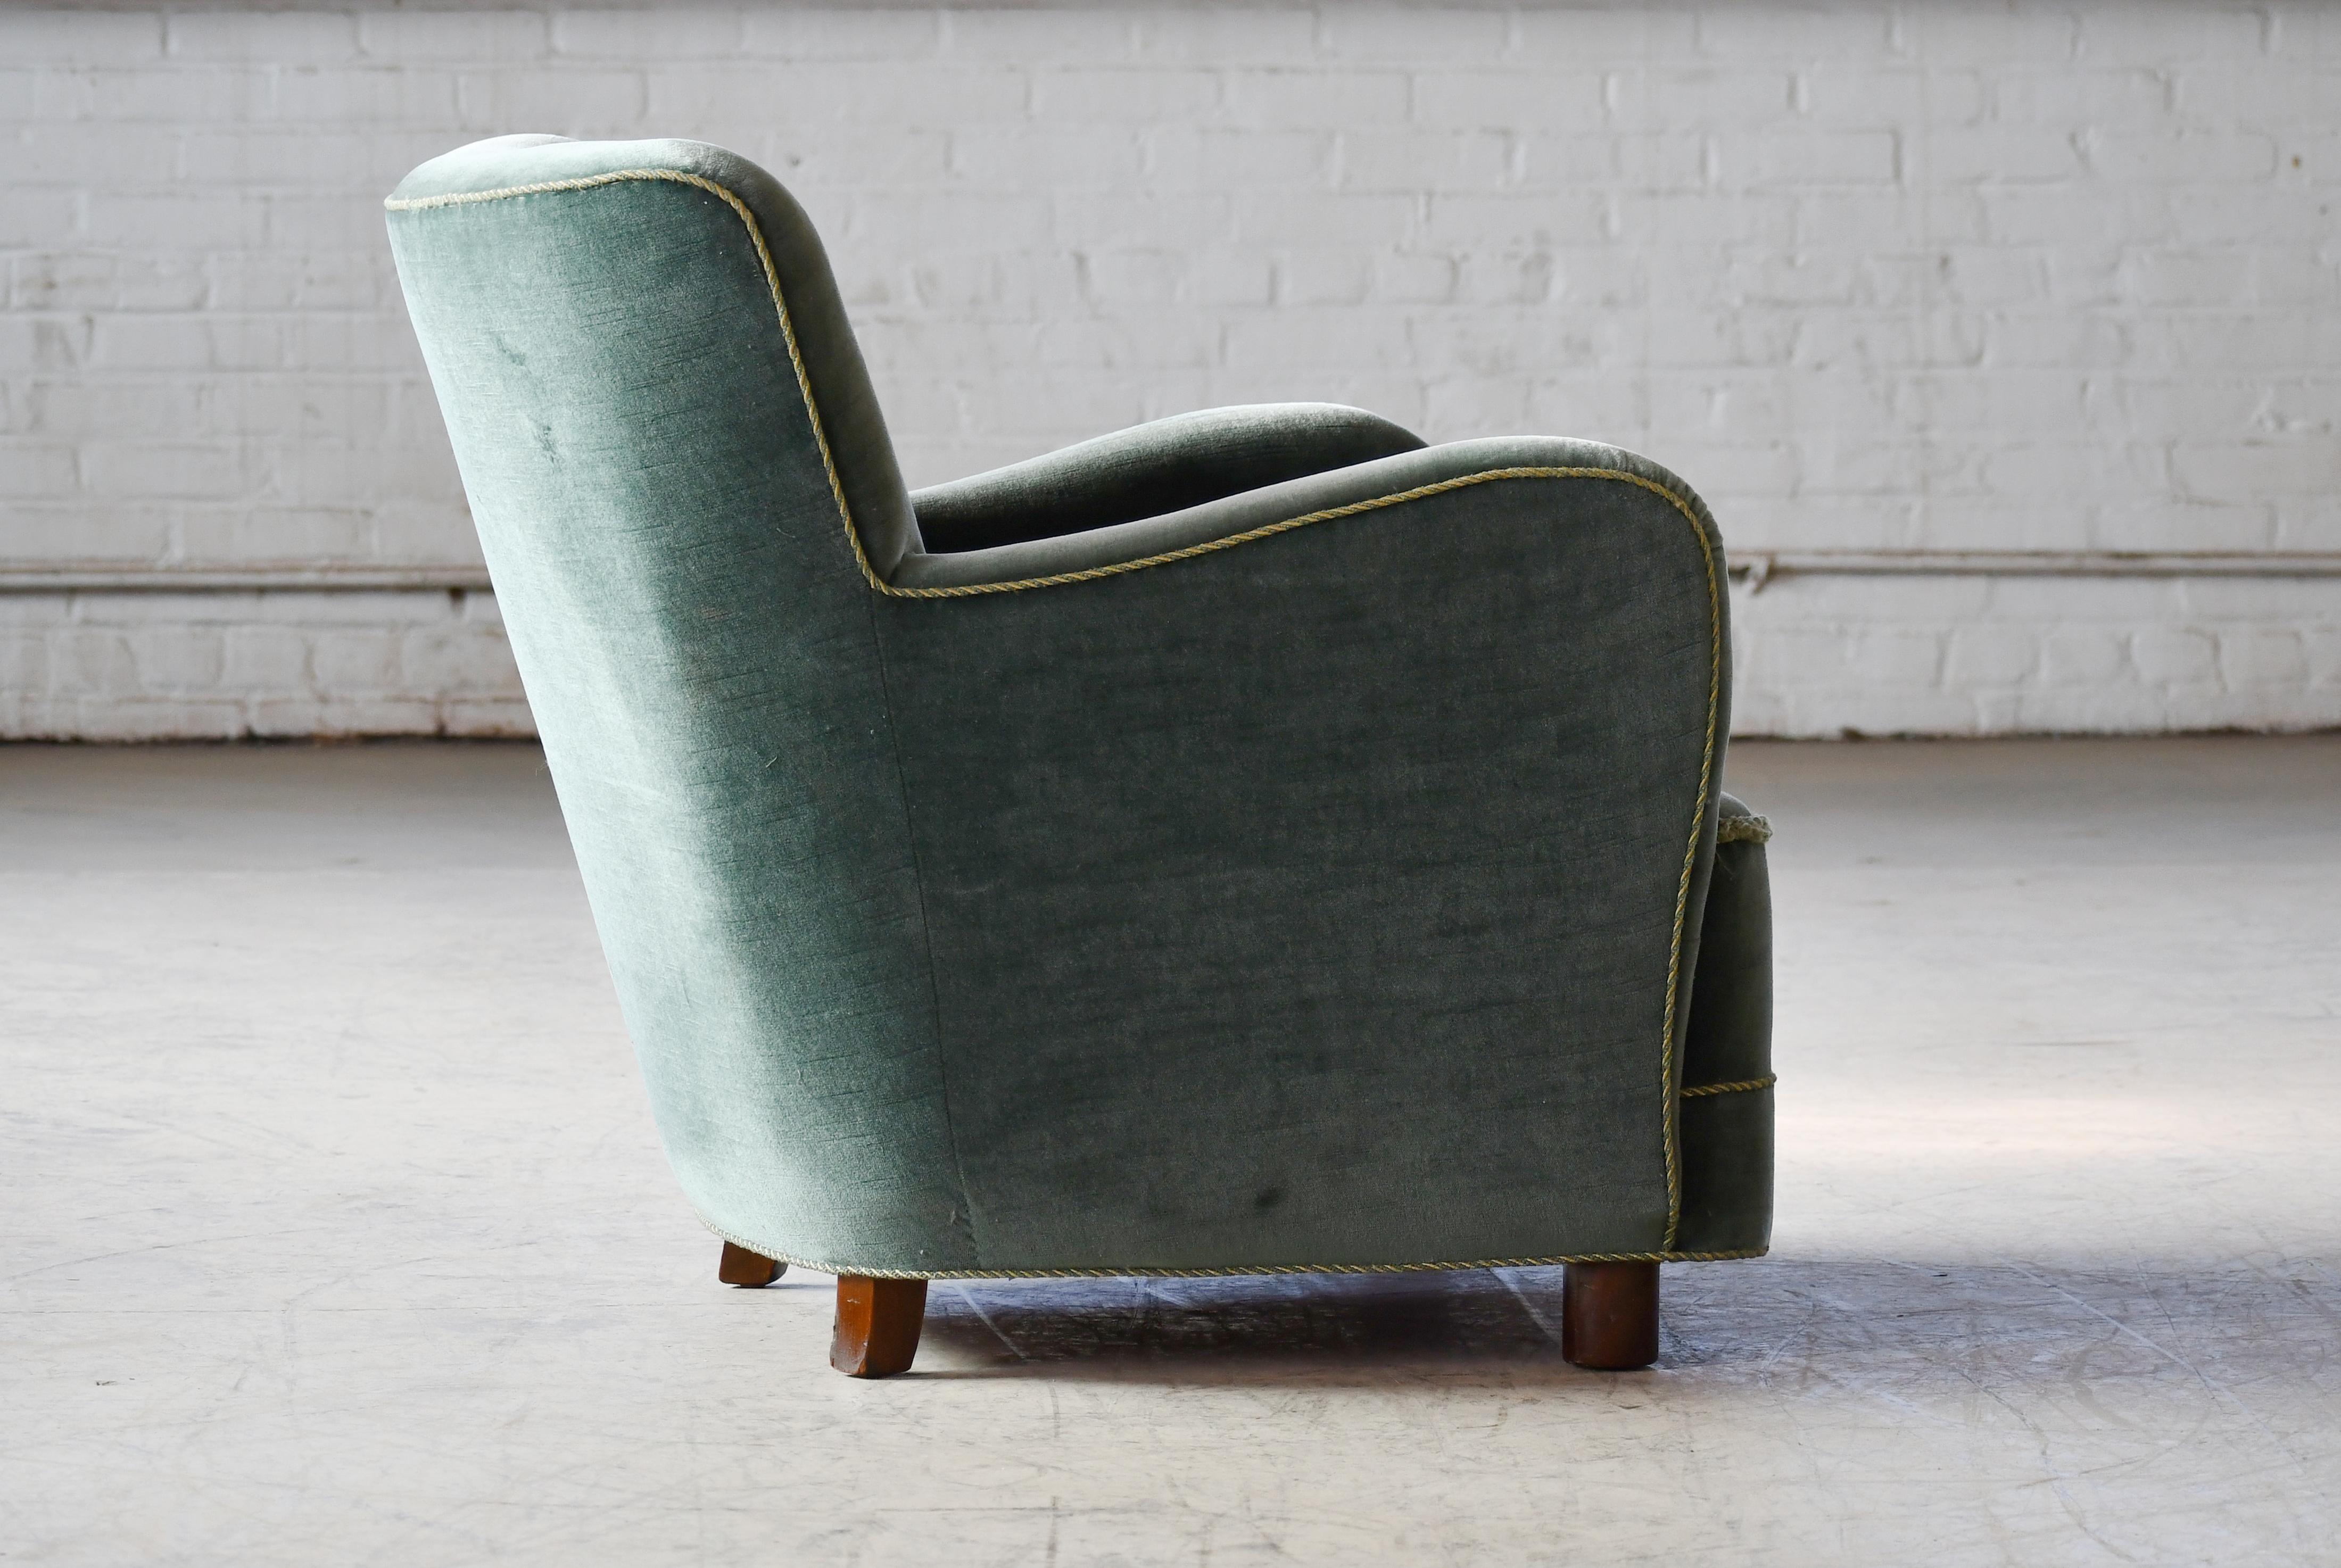 Danish Art Deco or Early Midcentury Lounge Chair in Green Mohair 1930-40s For Sale 4